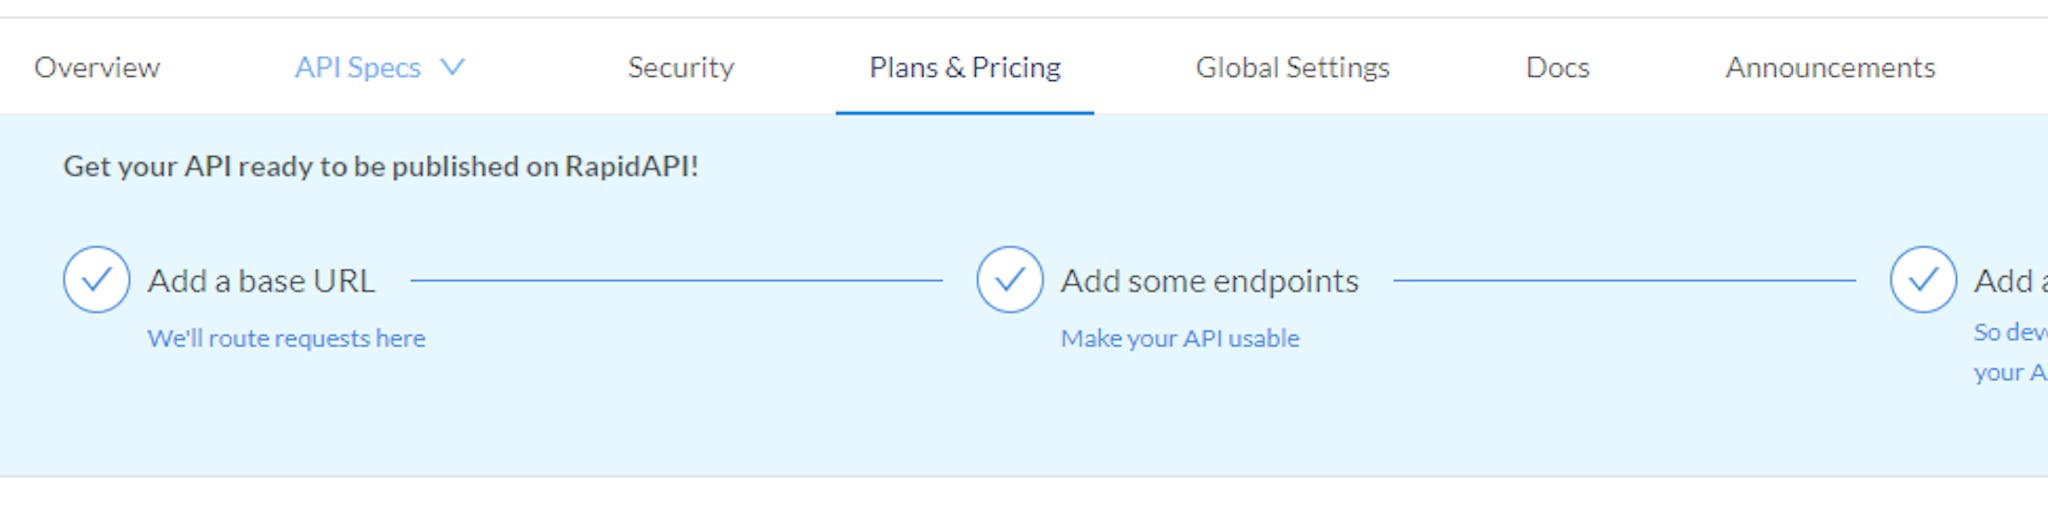 plans and pricing tab